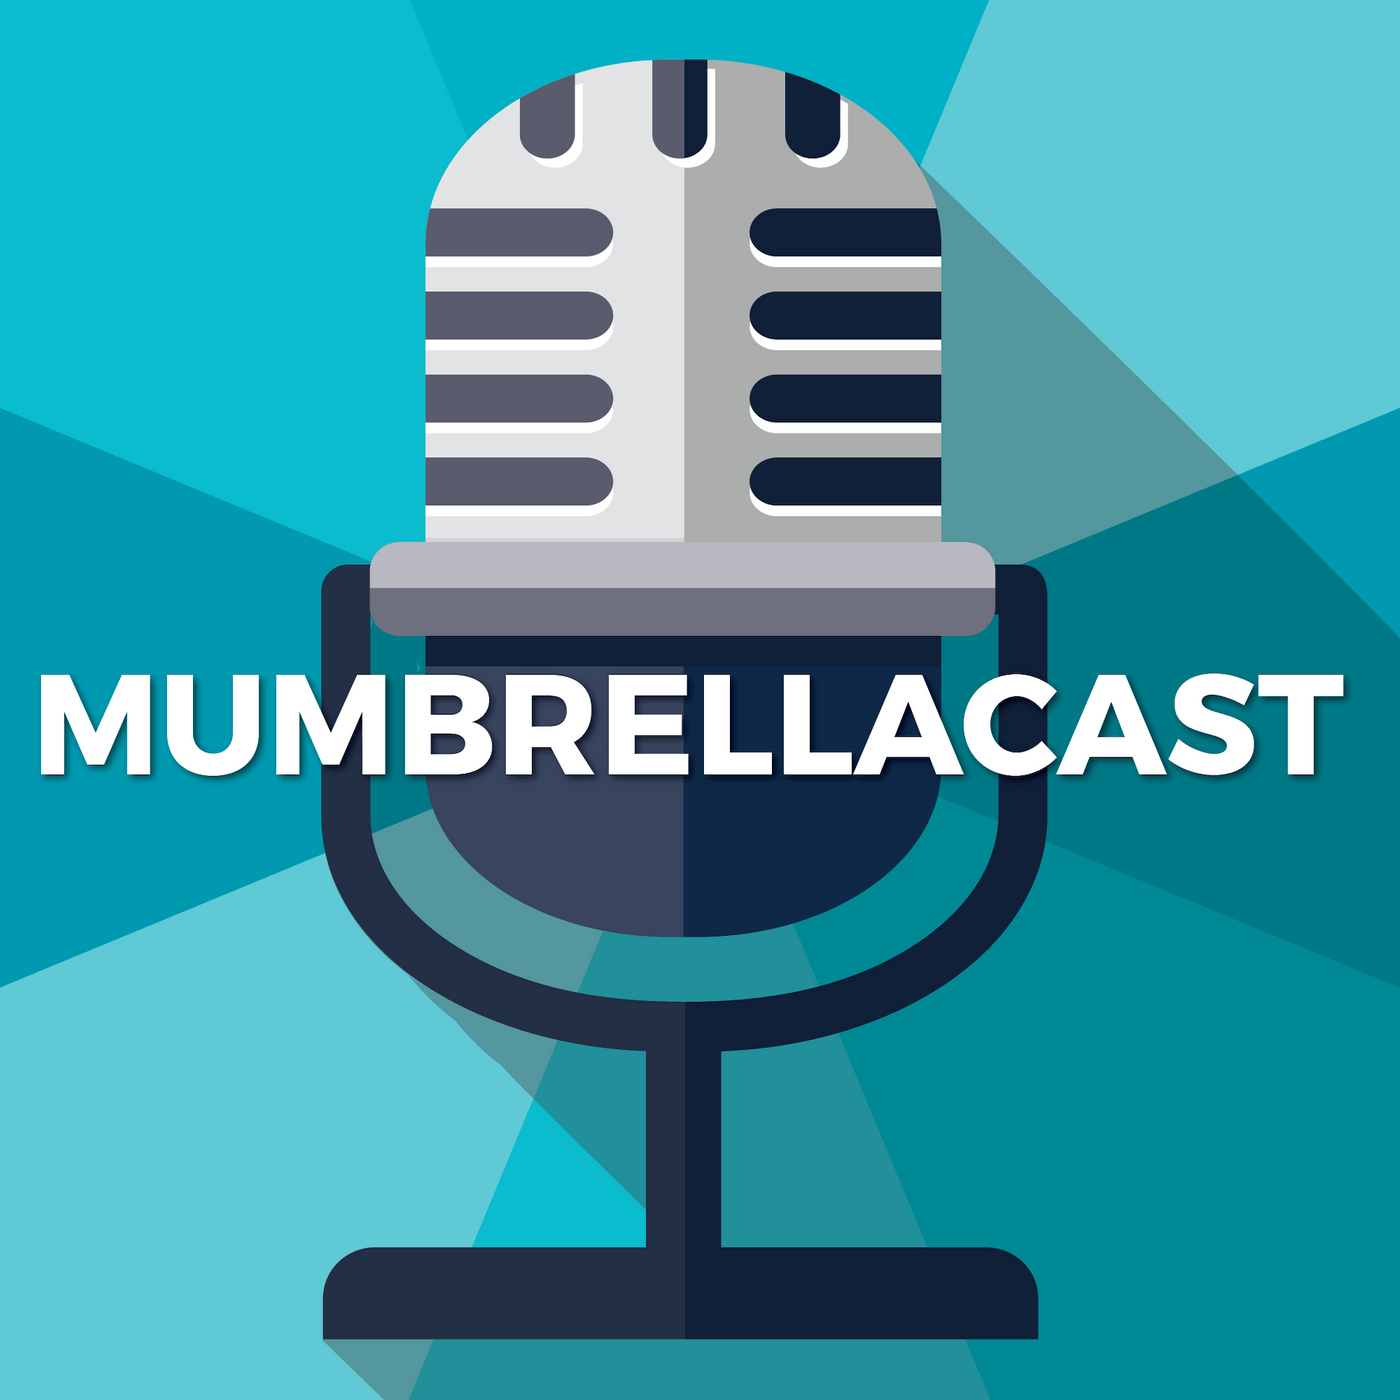 Mumbrellacast: COVID-19, Government Communication And What's Happening To Mumbrella's Events